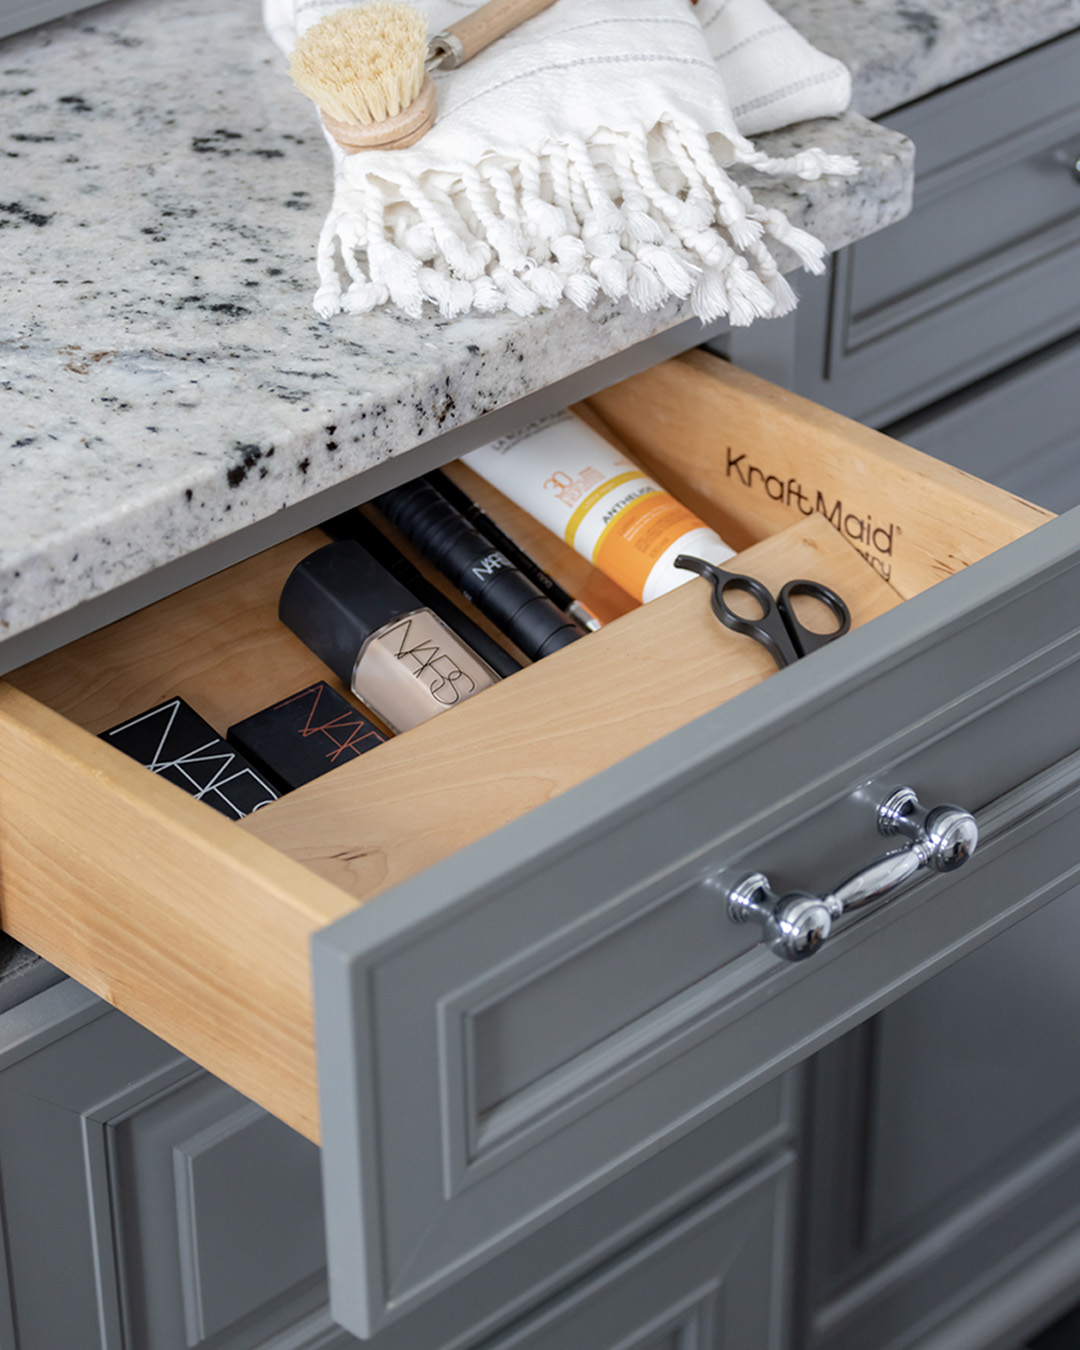 If you're installing new cabinetry in your home, it's absolutely worthwhile to take the time to plan for a few custom storage components that suit your family's needs as well. Here are some favorite built-in cabinetry storage components that we've photographed.